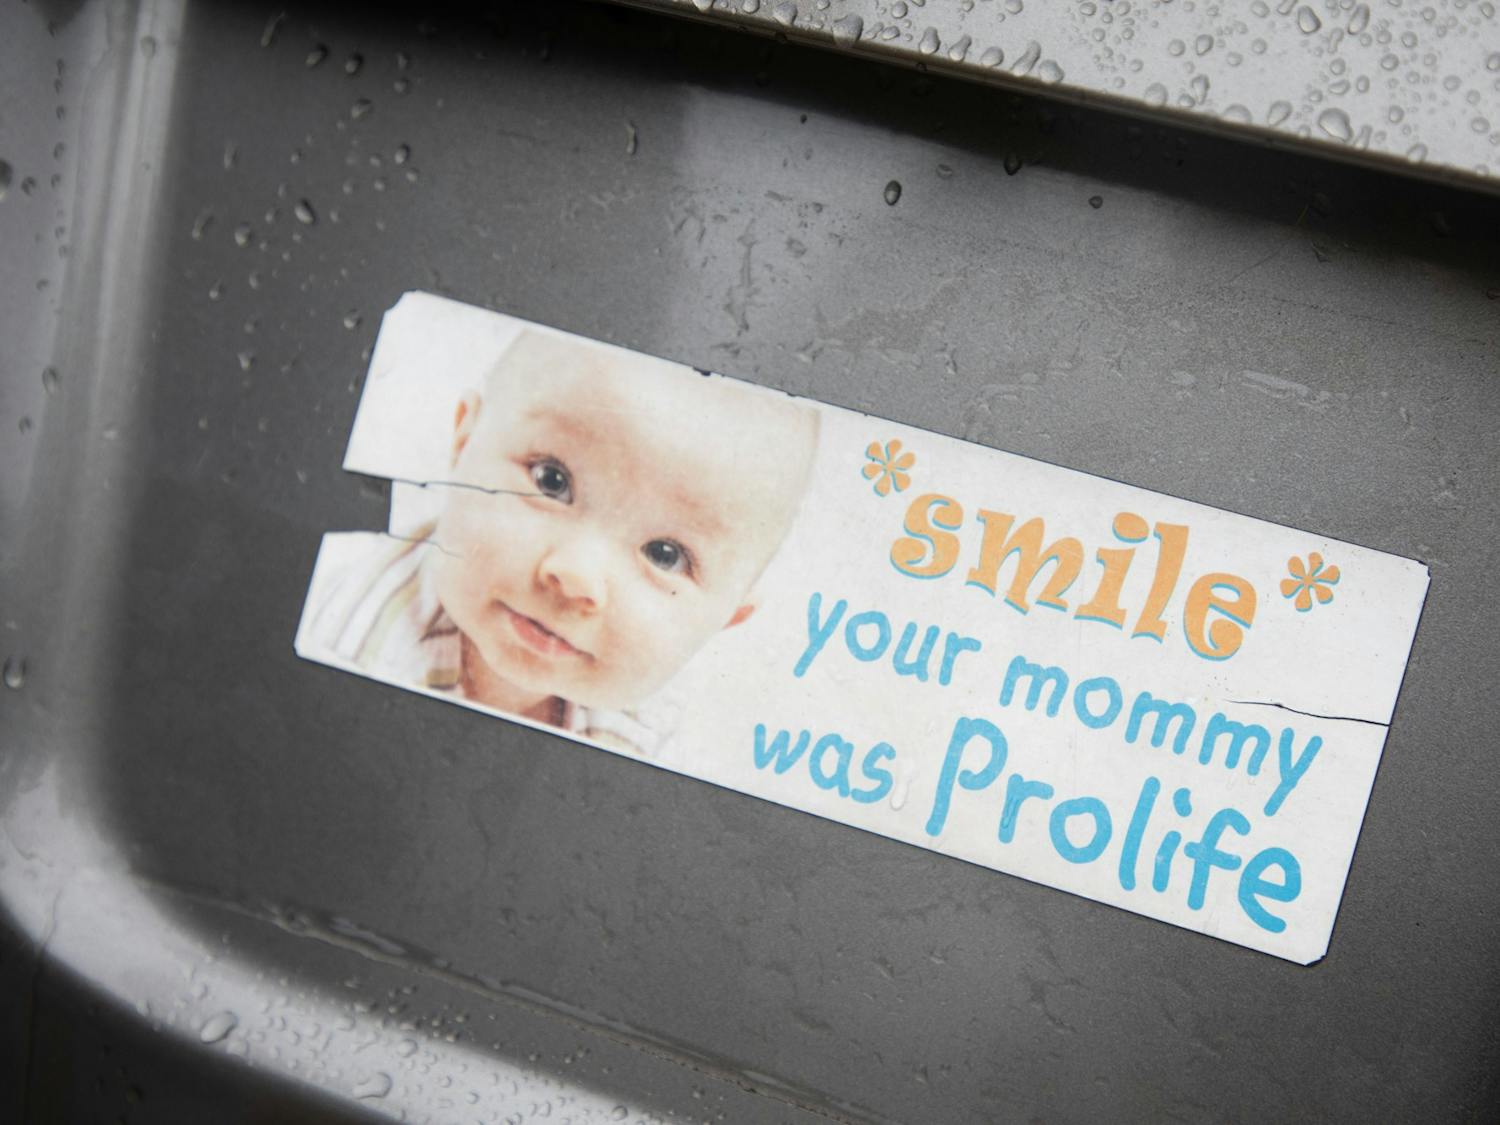 A bumper sticker on a pro-life supporter's car reads, "Smile, your mommy was prolife" on Saturday, Oct. 1, 2022.